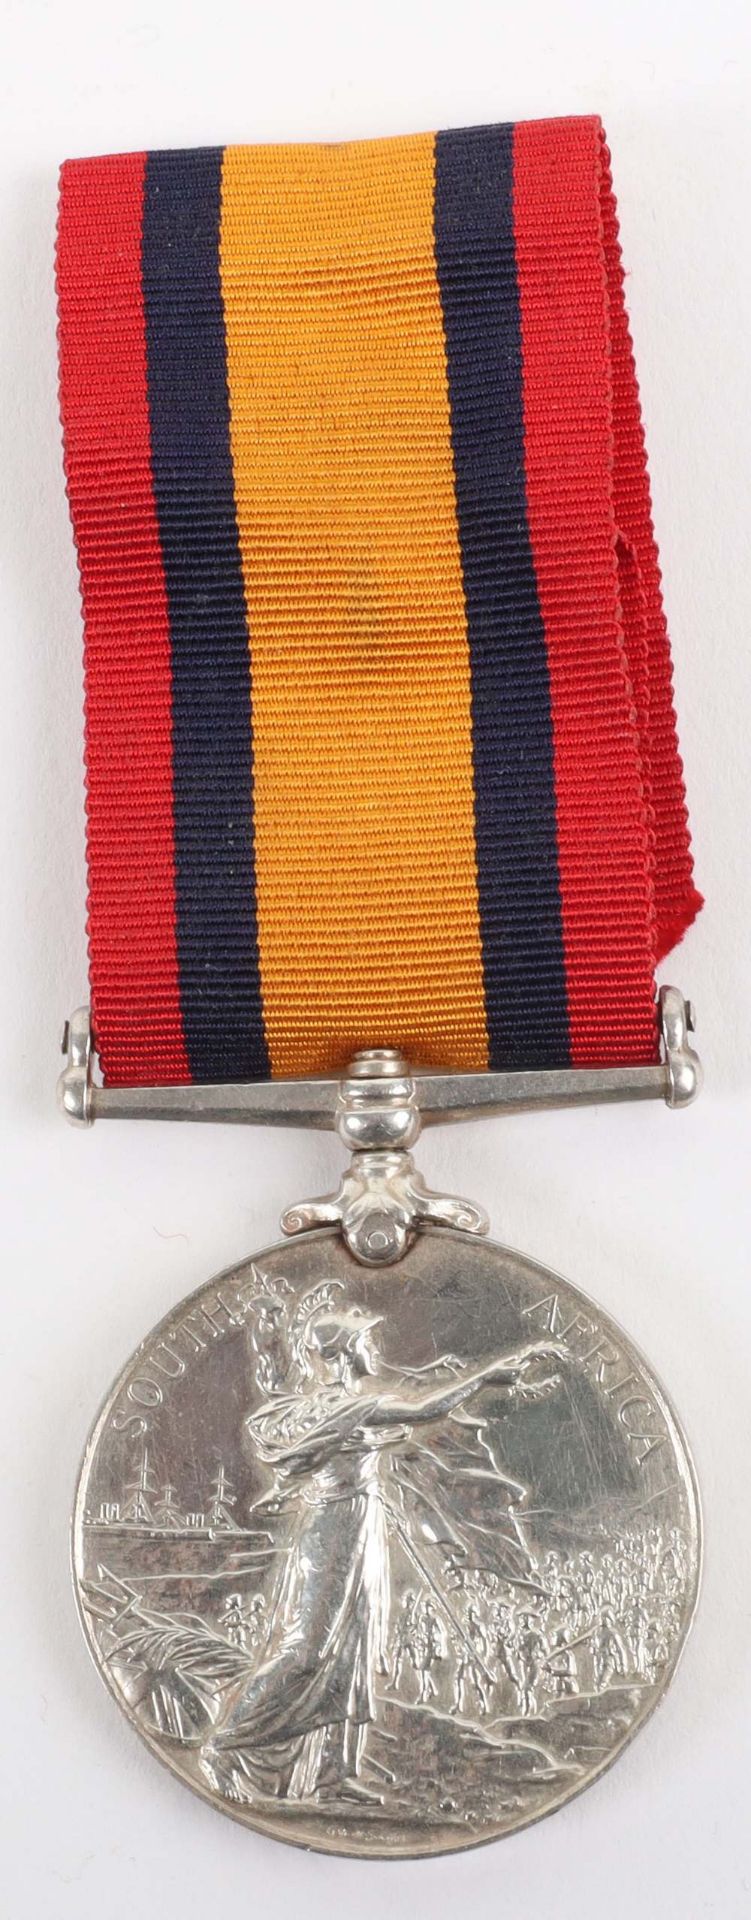 Queens South Africa Medal Imperial Military Railways - Image 2 of 3